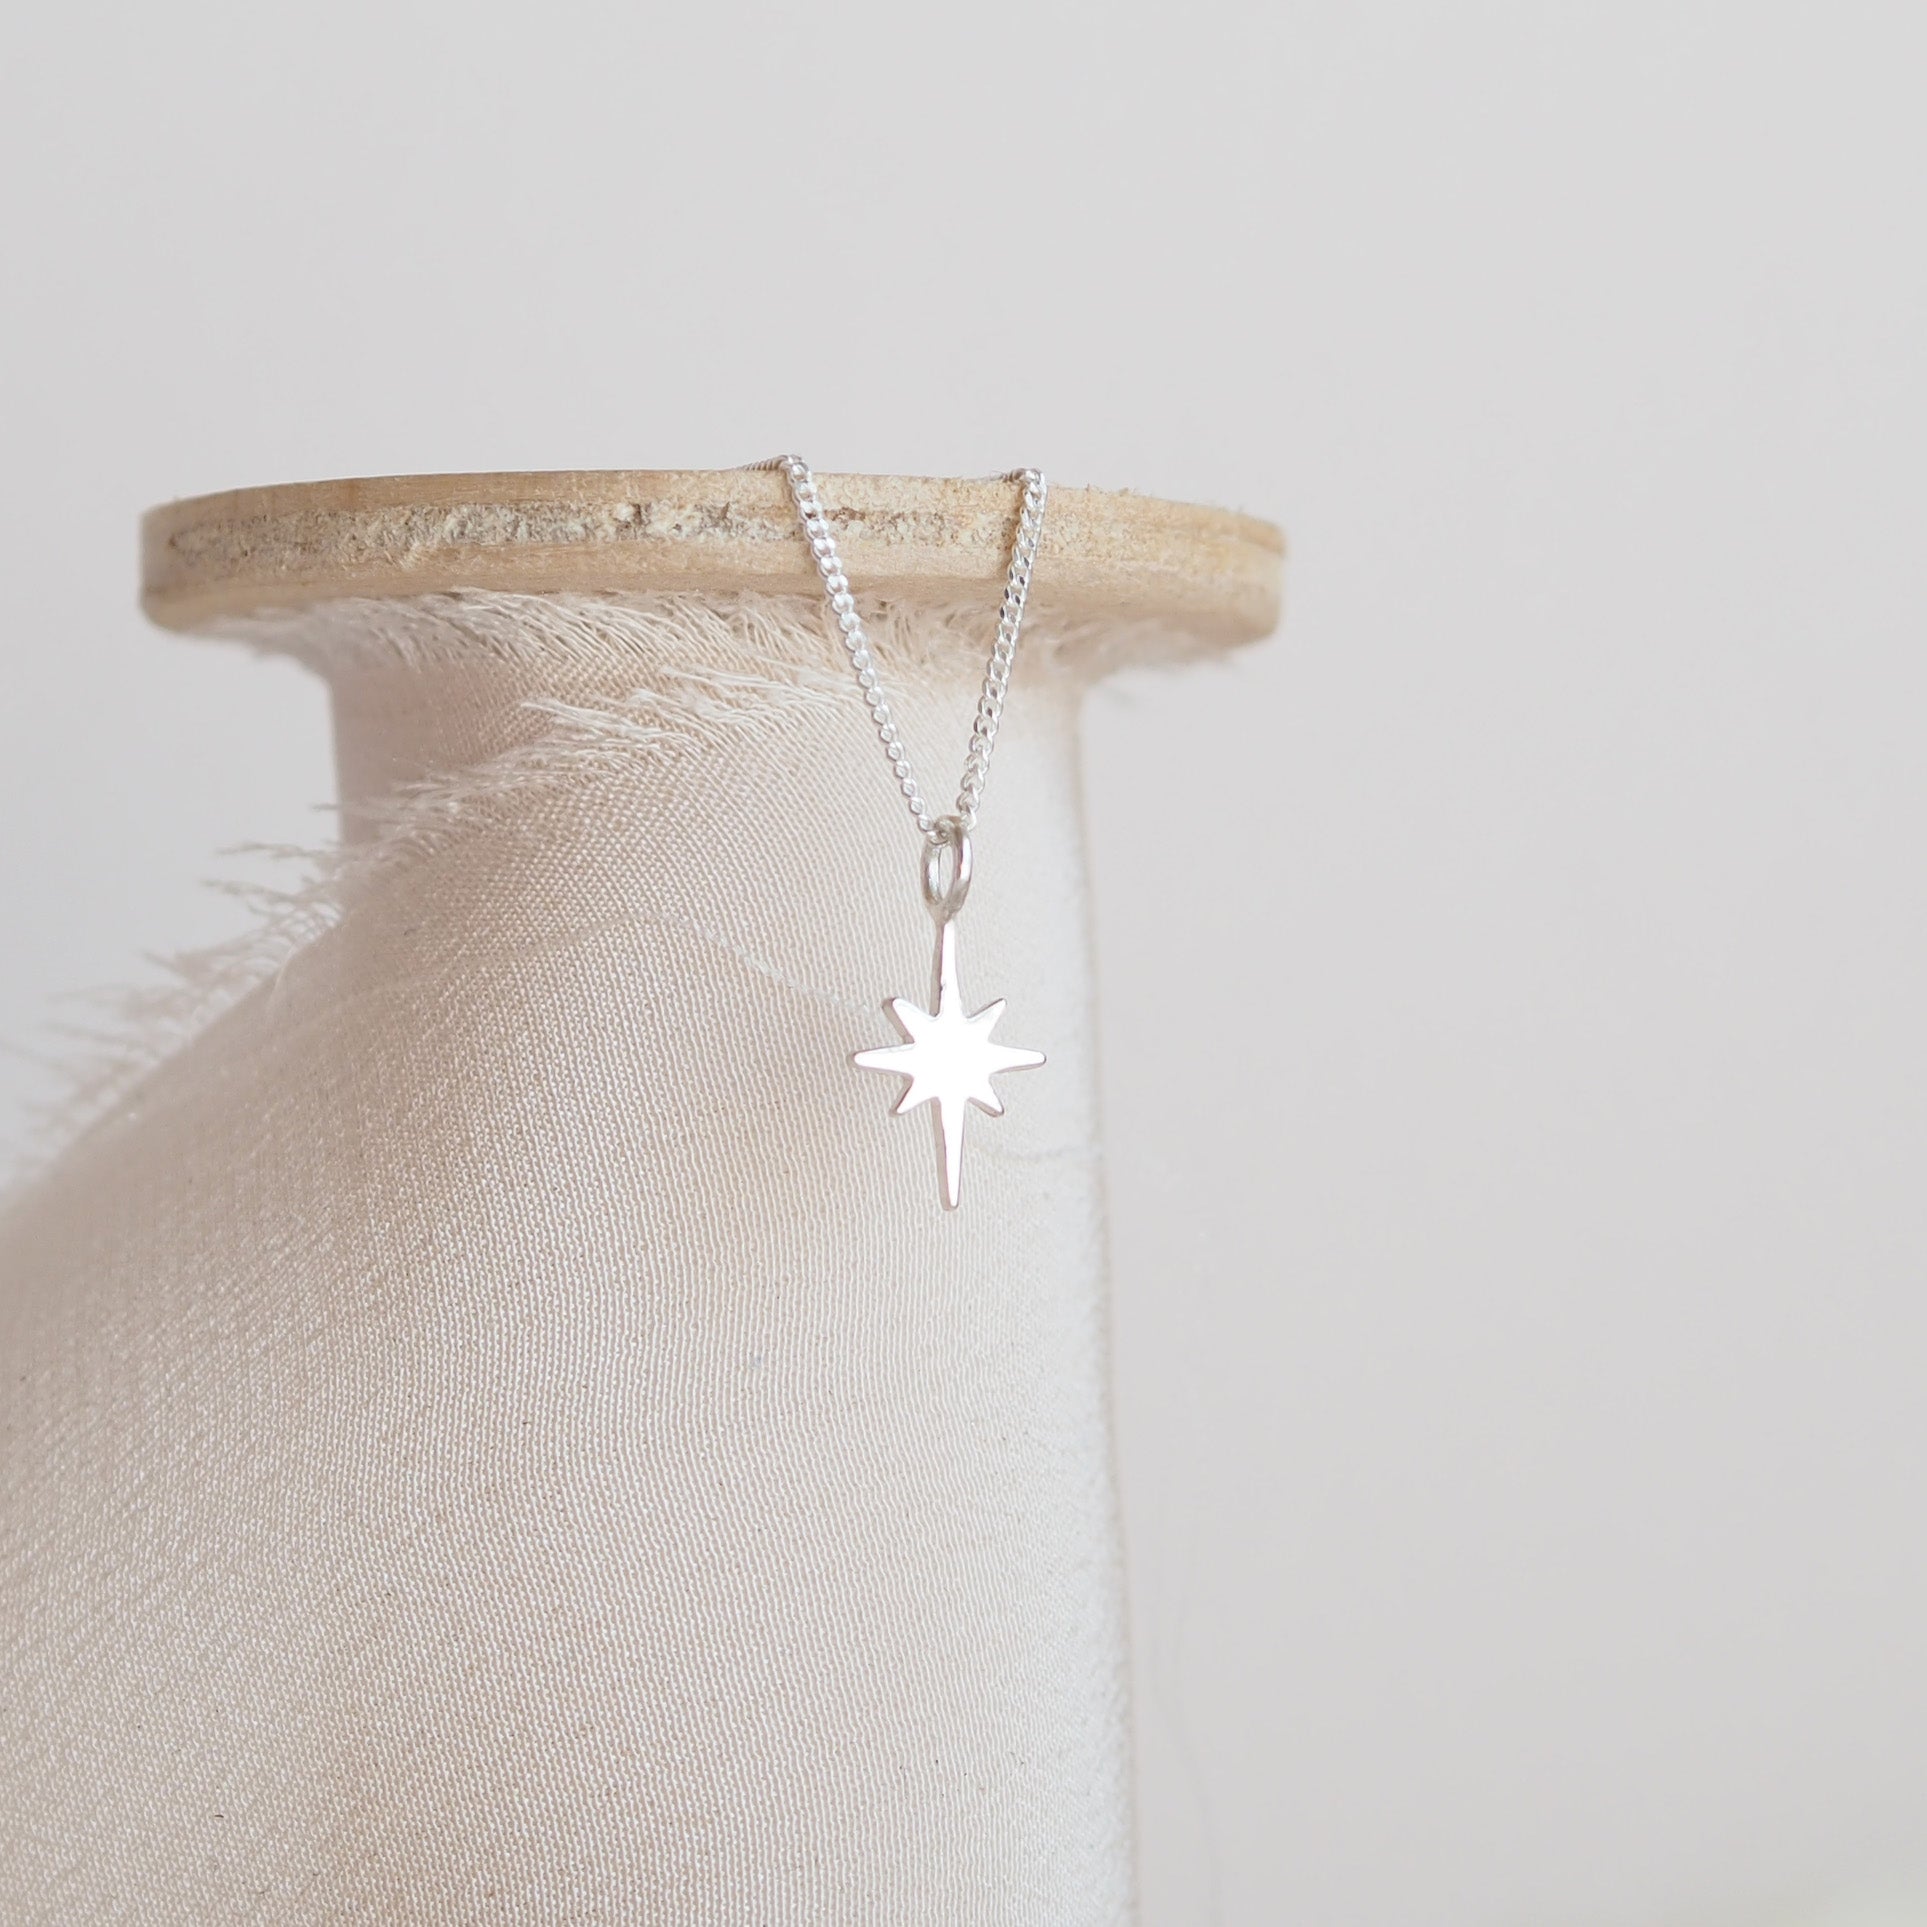 North Star Necklace in Sterling Silver